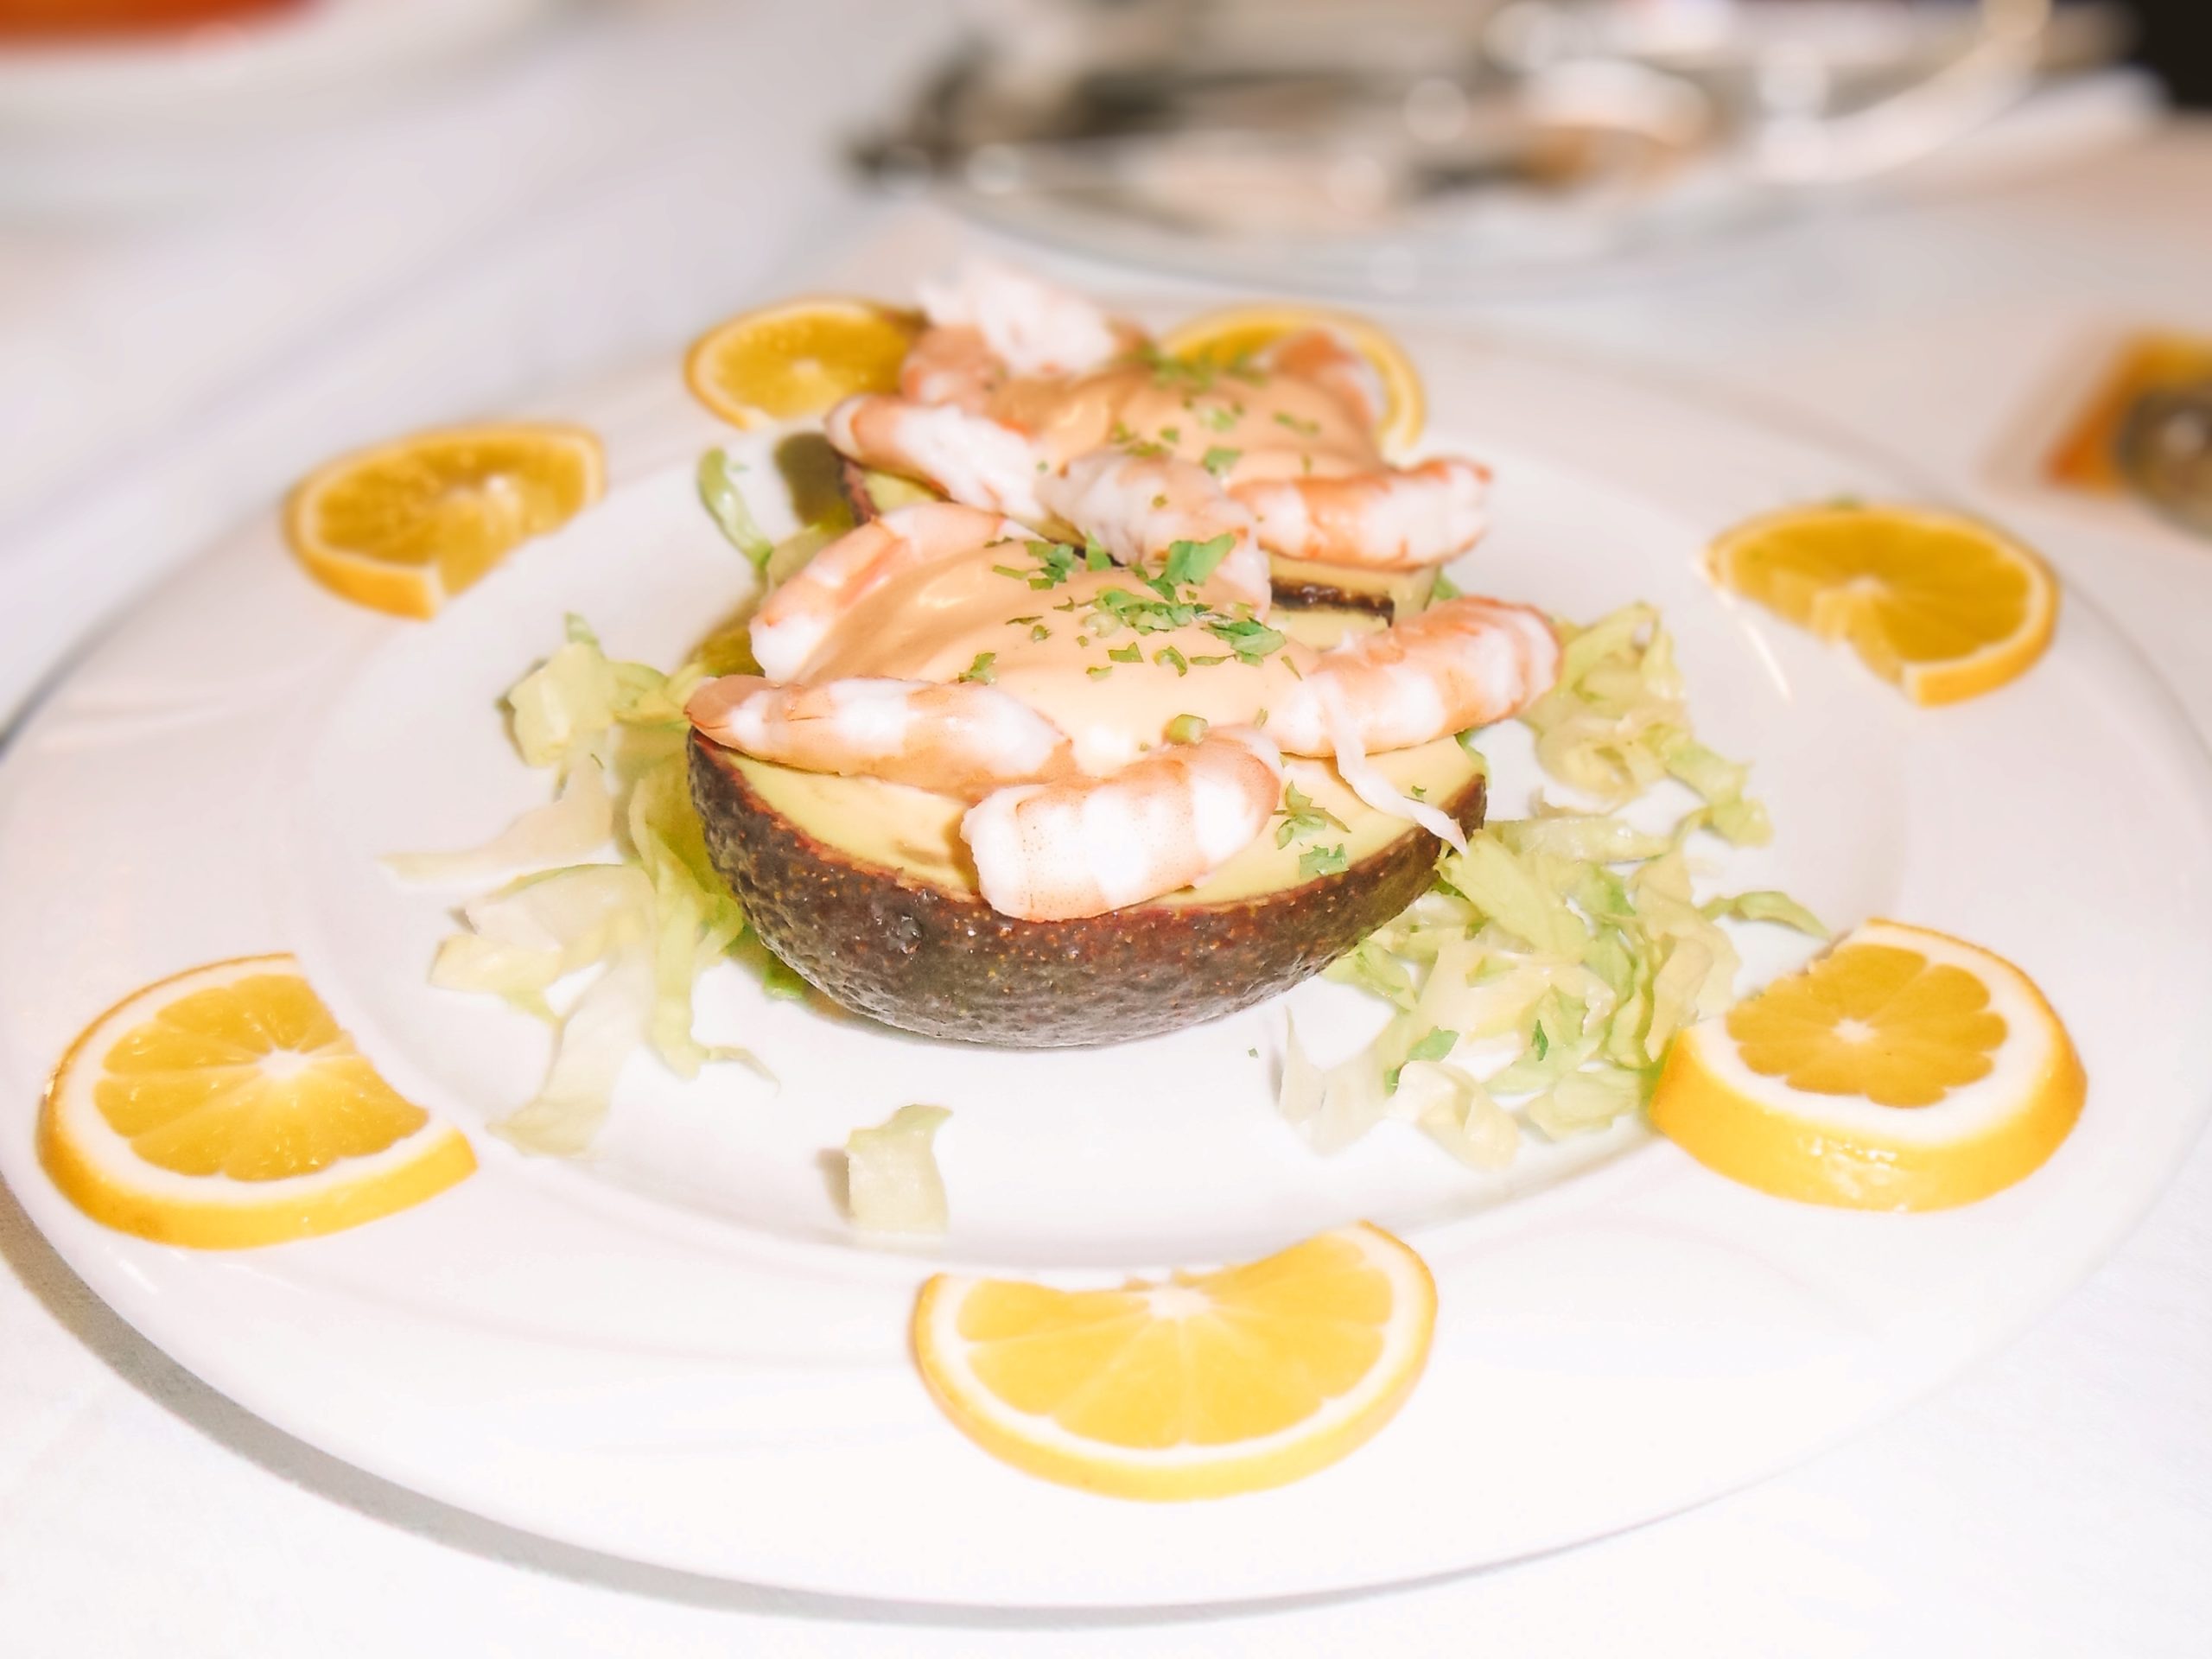 CANARY ISLAND CUISINE - WHAT YOU SHOULD TRY